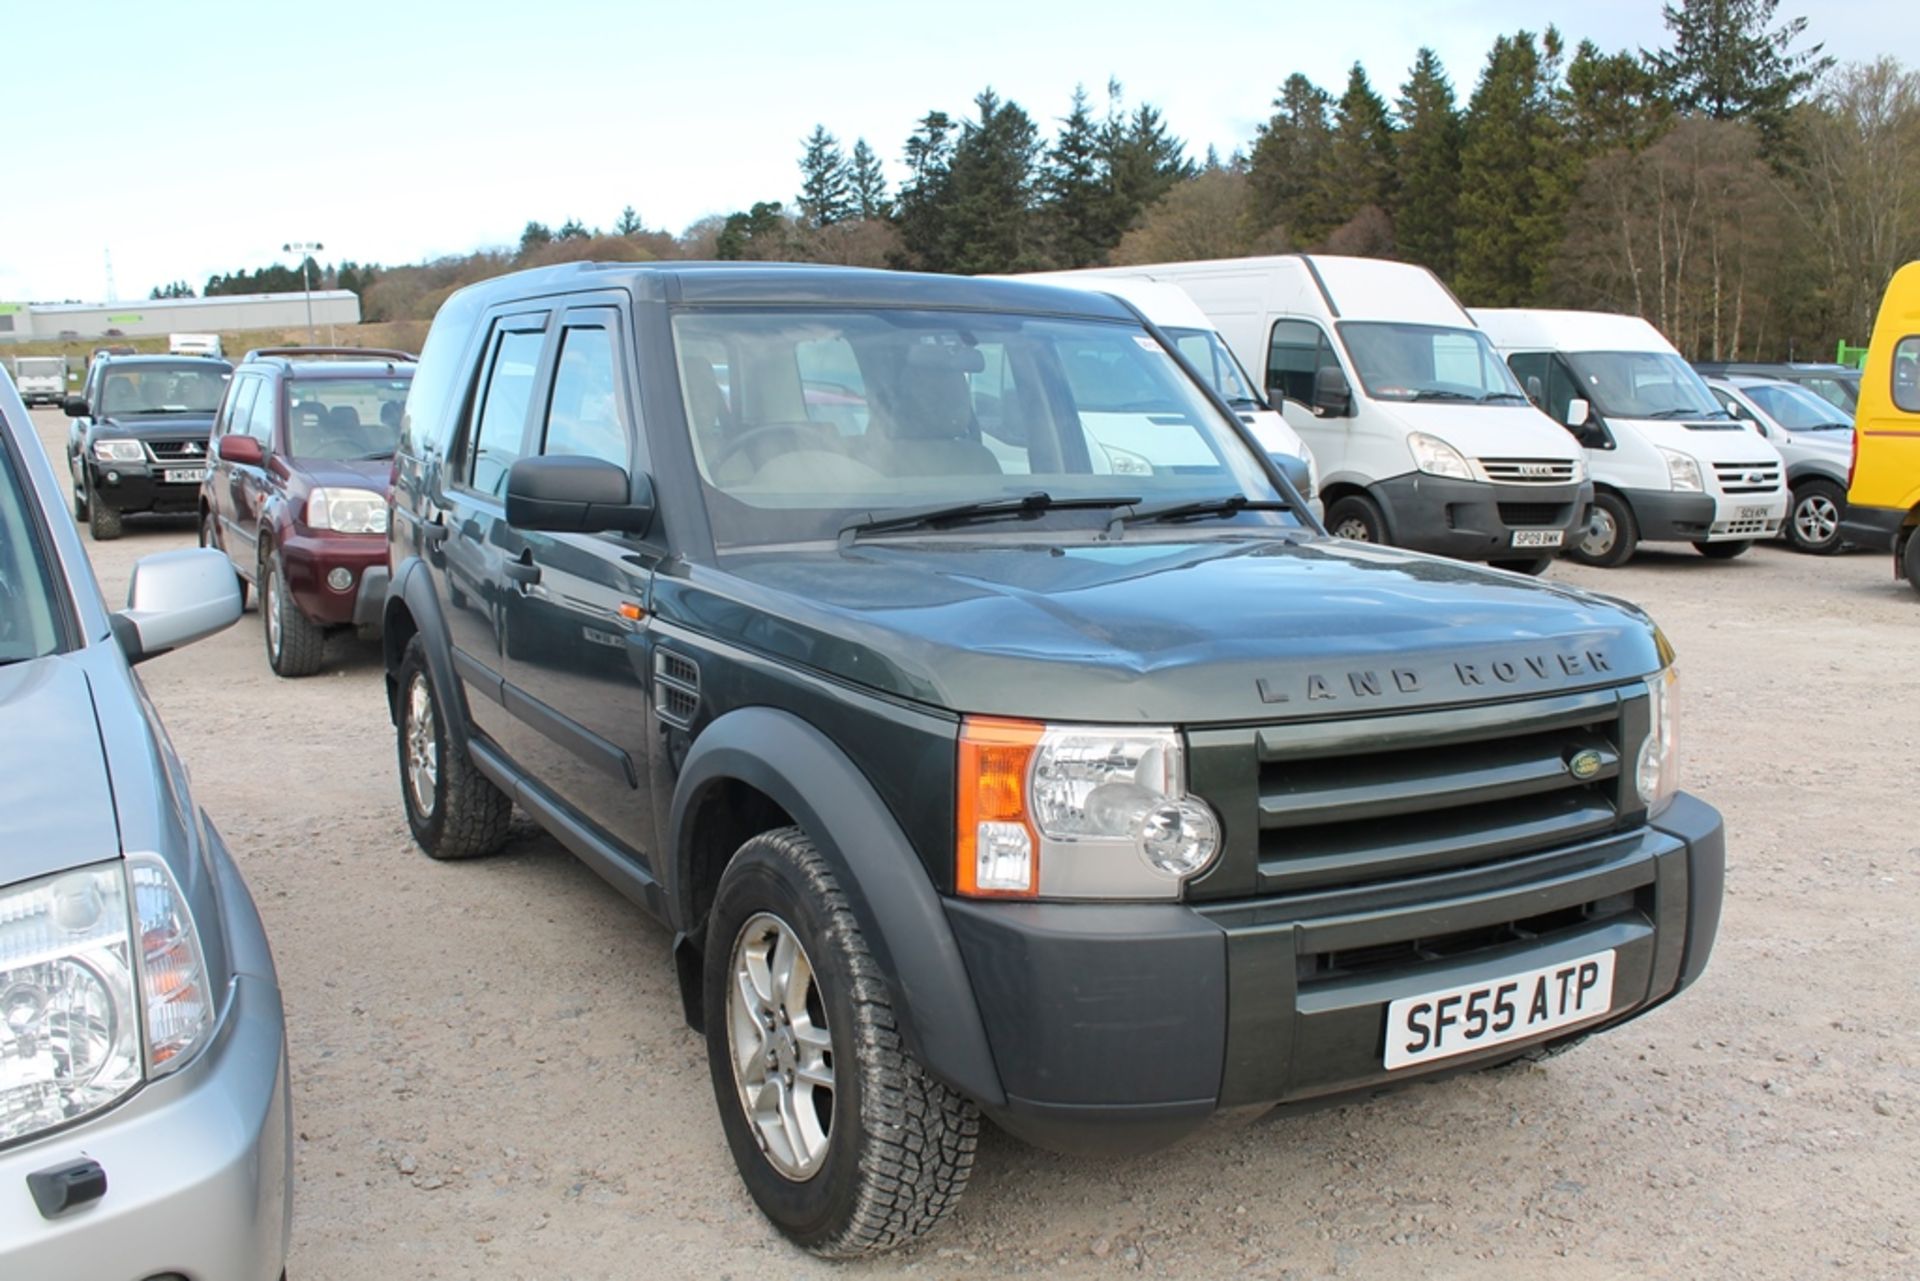 Land Rover Discovery 3 Tdv6 - 2720cc 5 Door Estate - Image 2 of 4